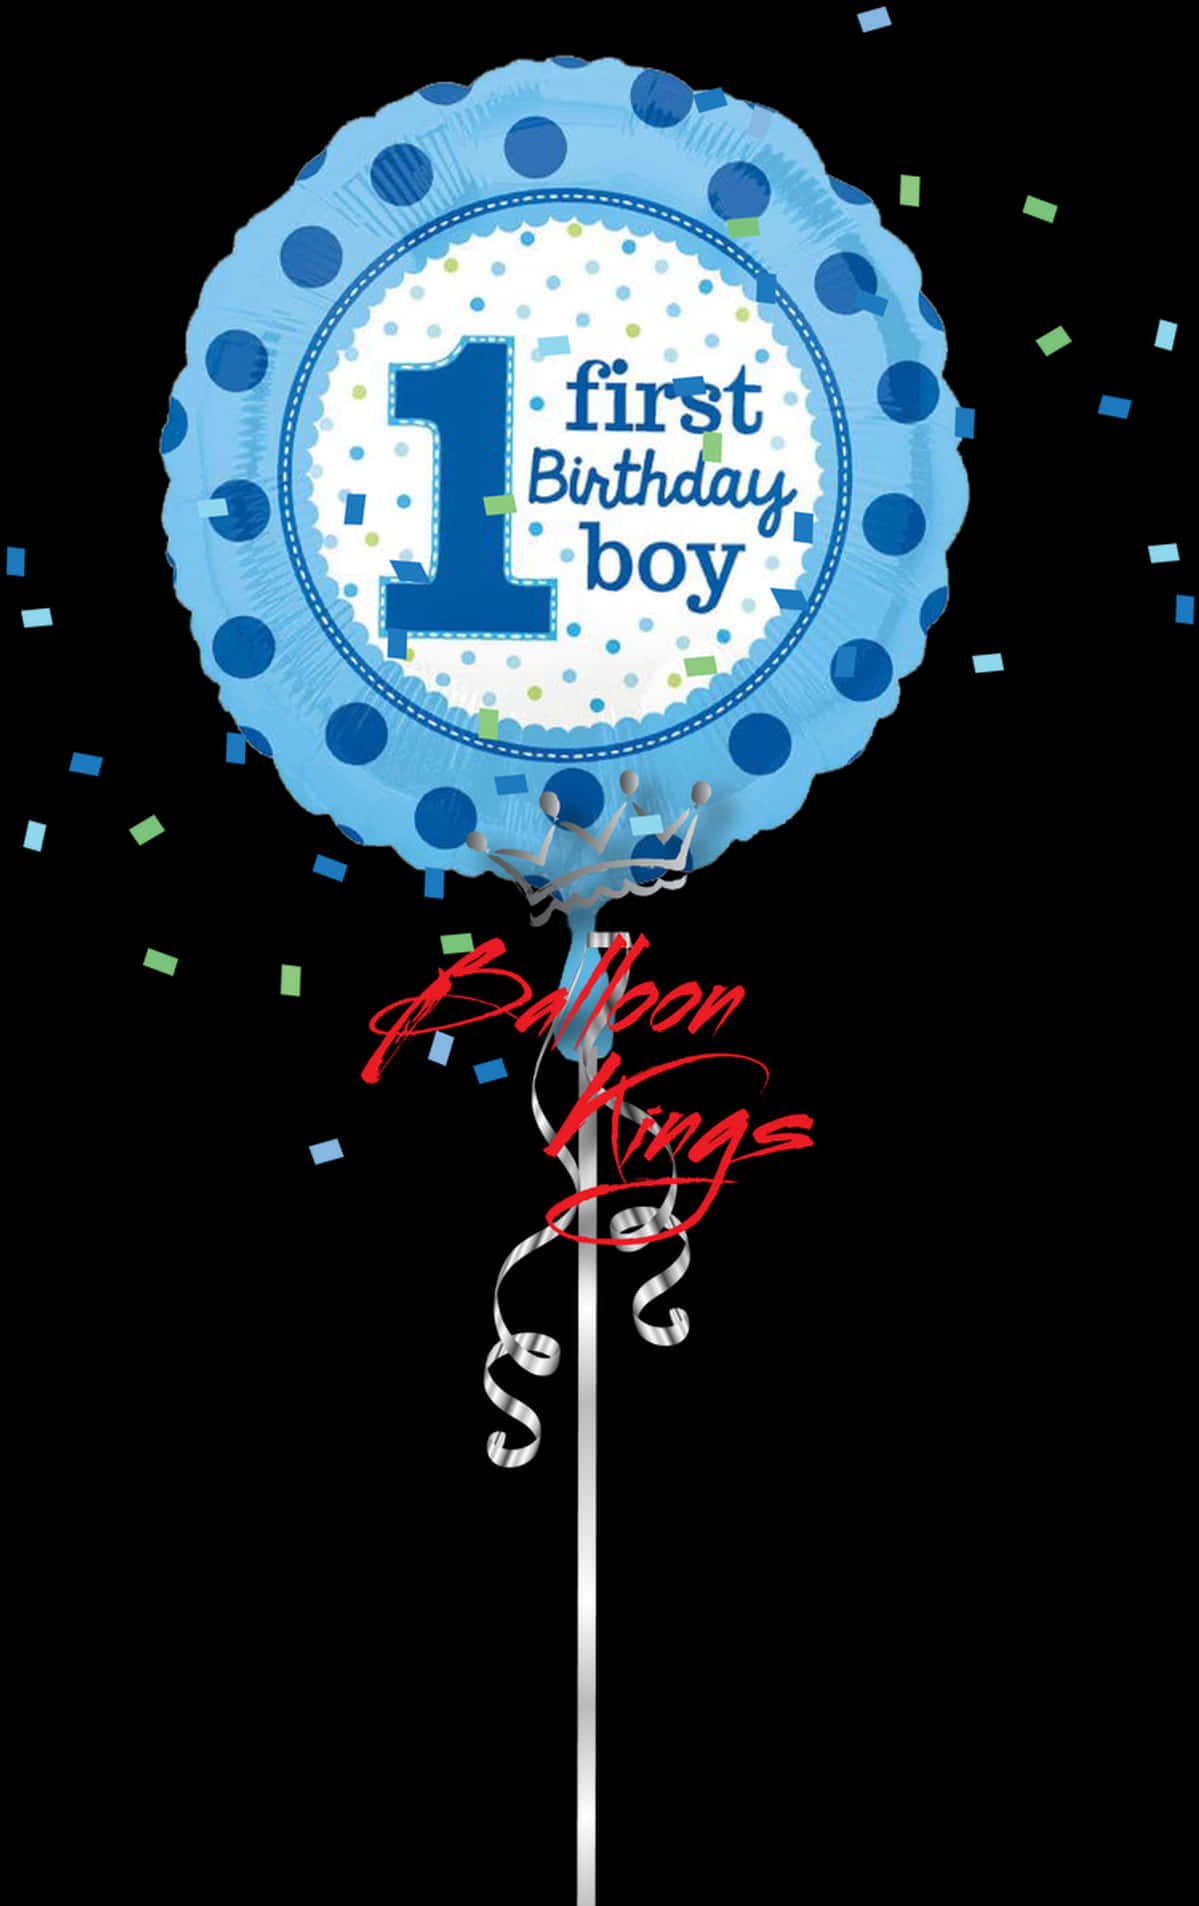 First Birthday Boy Balloon PNG image